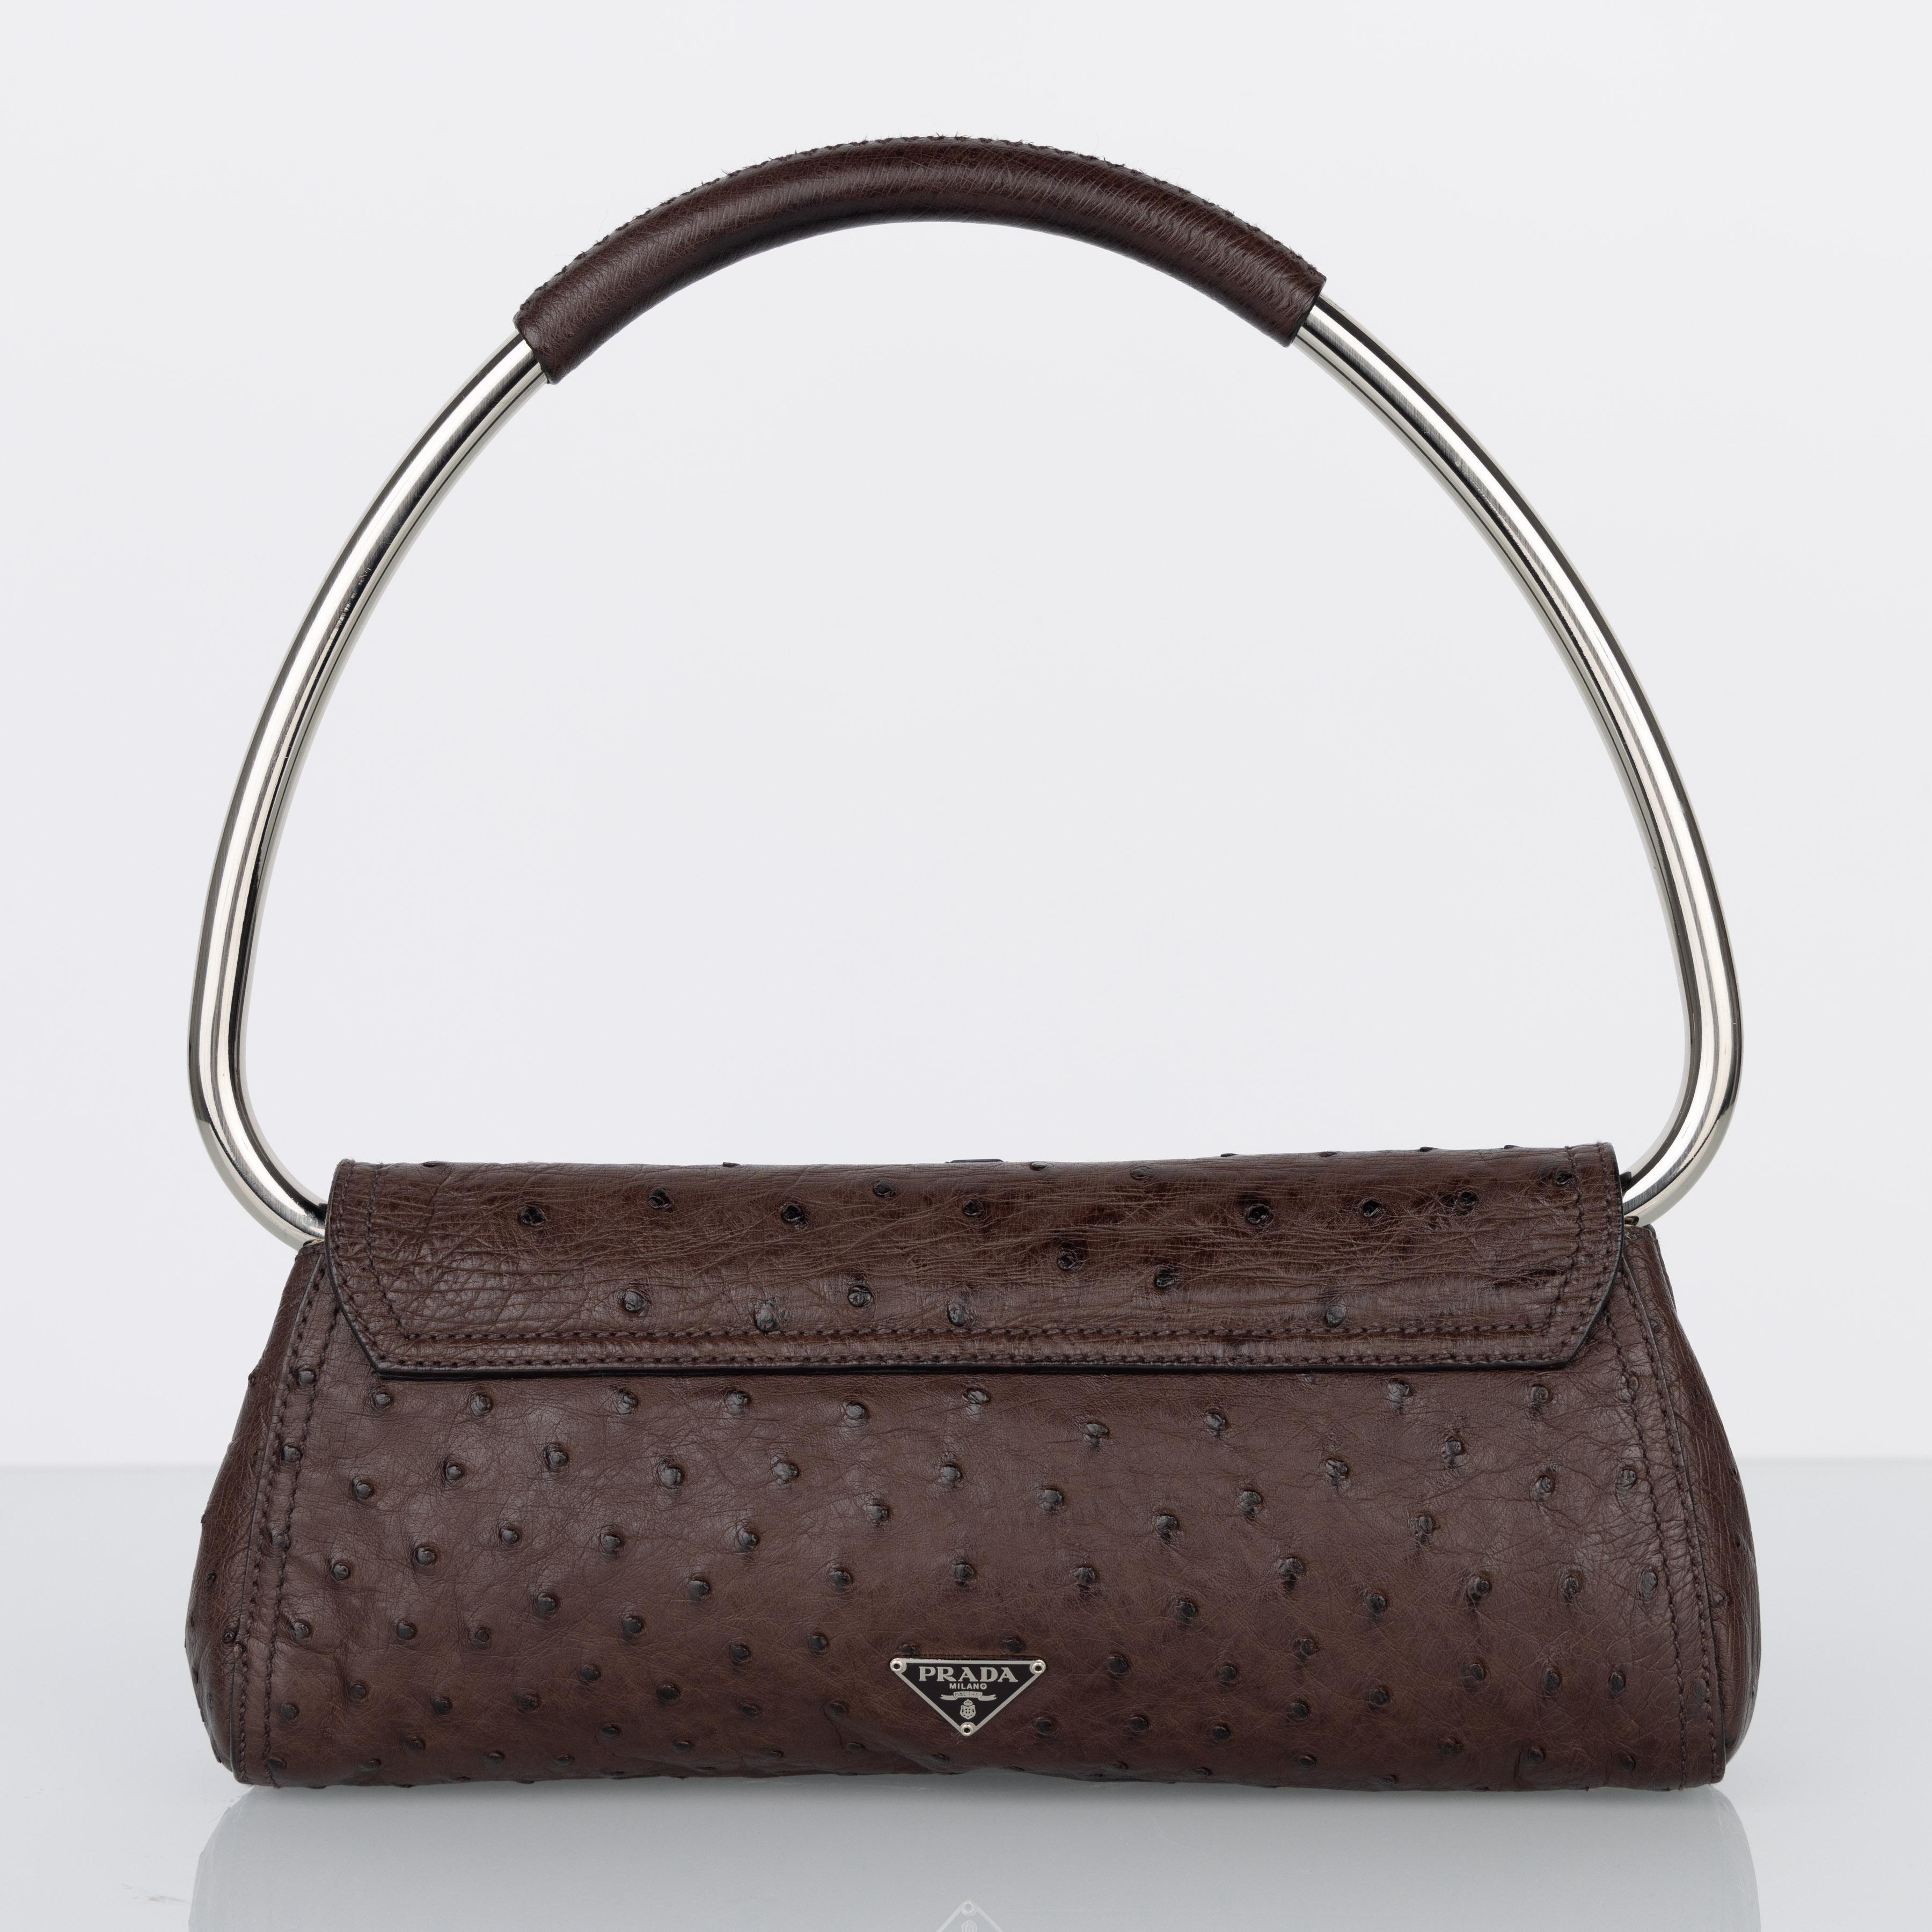 Prada Brown Ostrich Leather Jewel Embellished Swing Bag SS 2003 Archival Piece For Sale 3